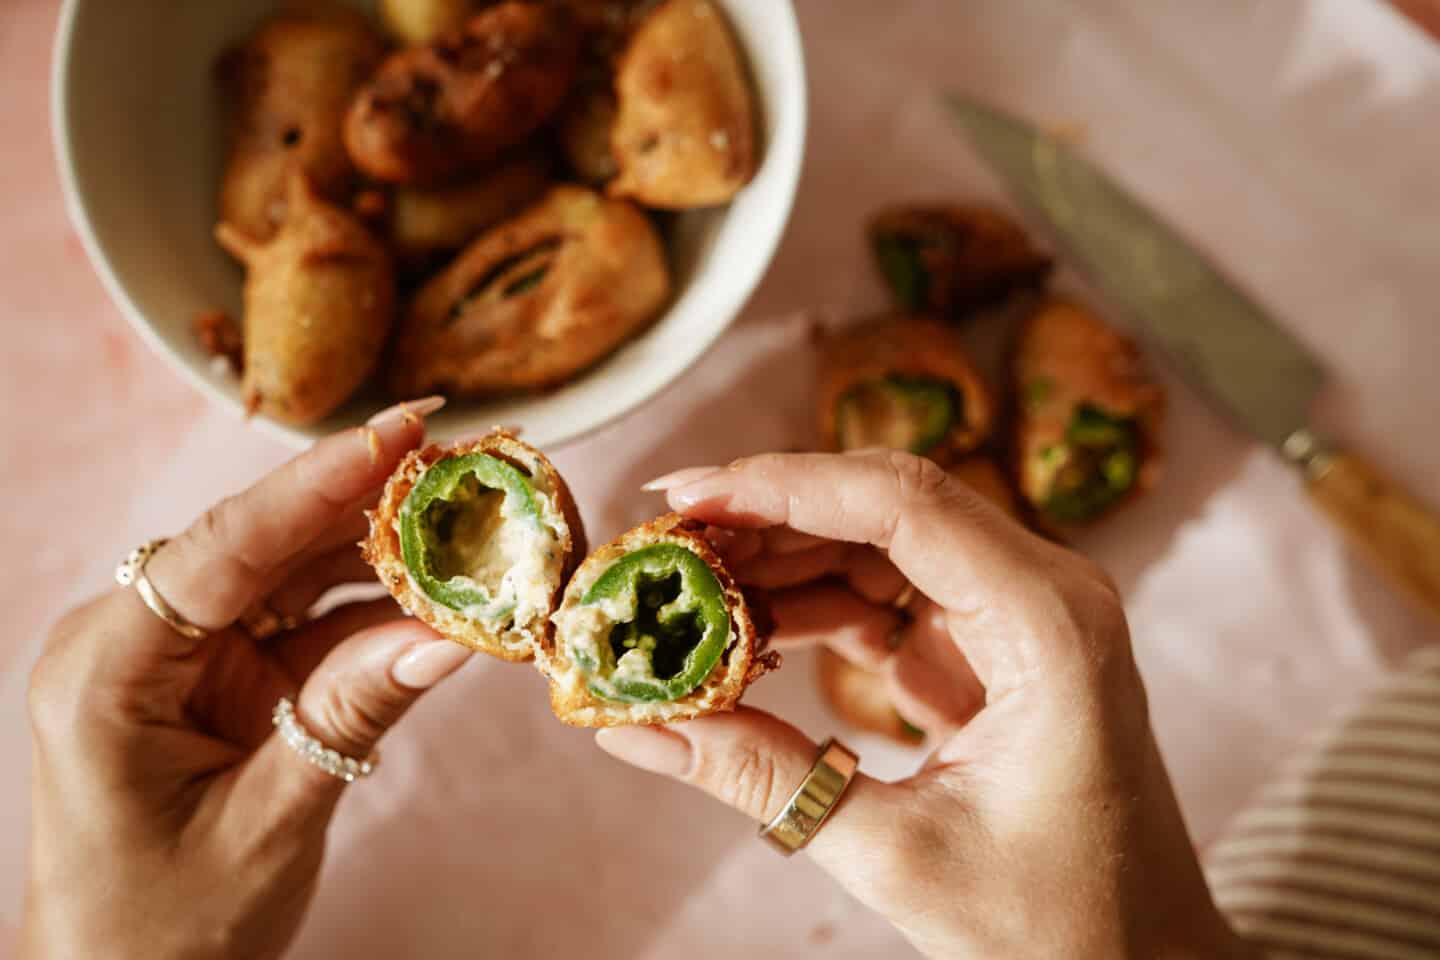 Hands holding a cracked opened stuffed jalapeno popper